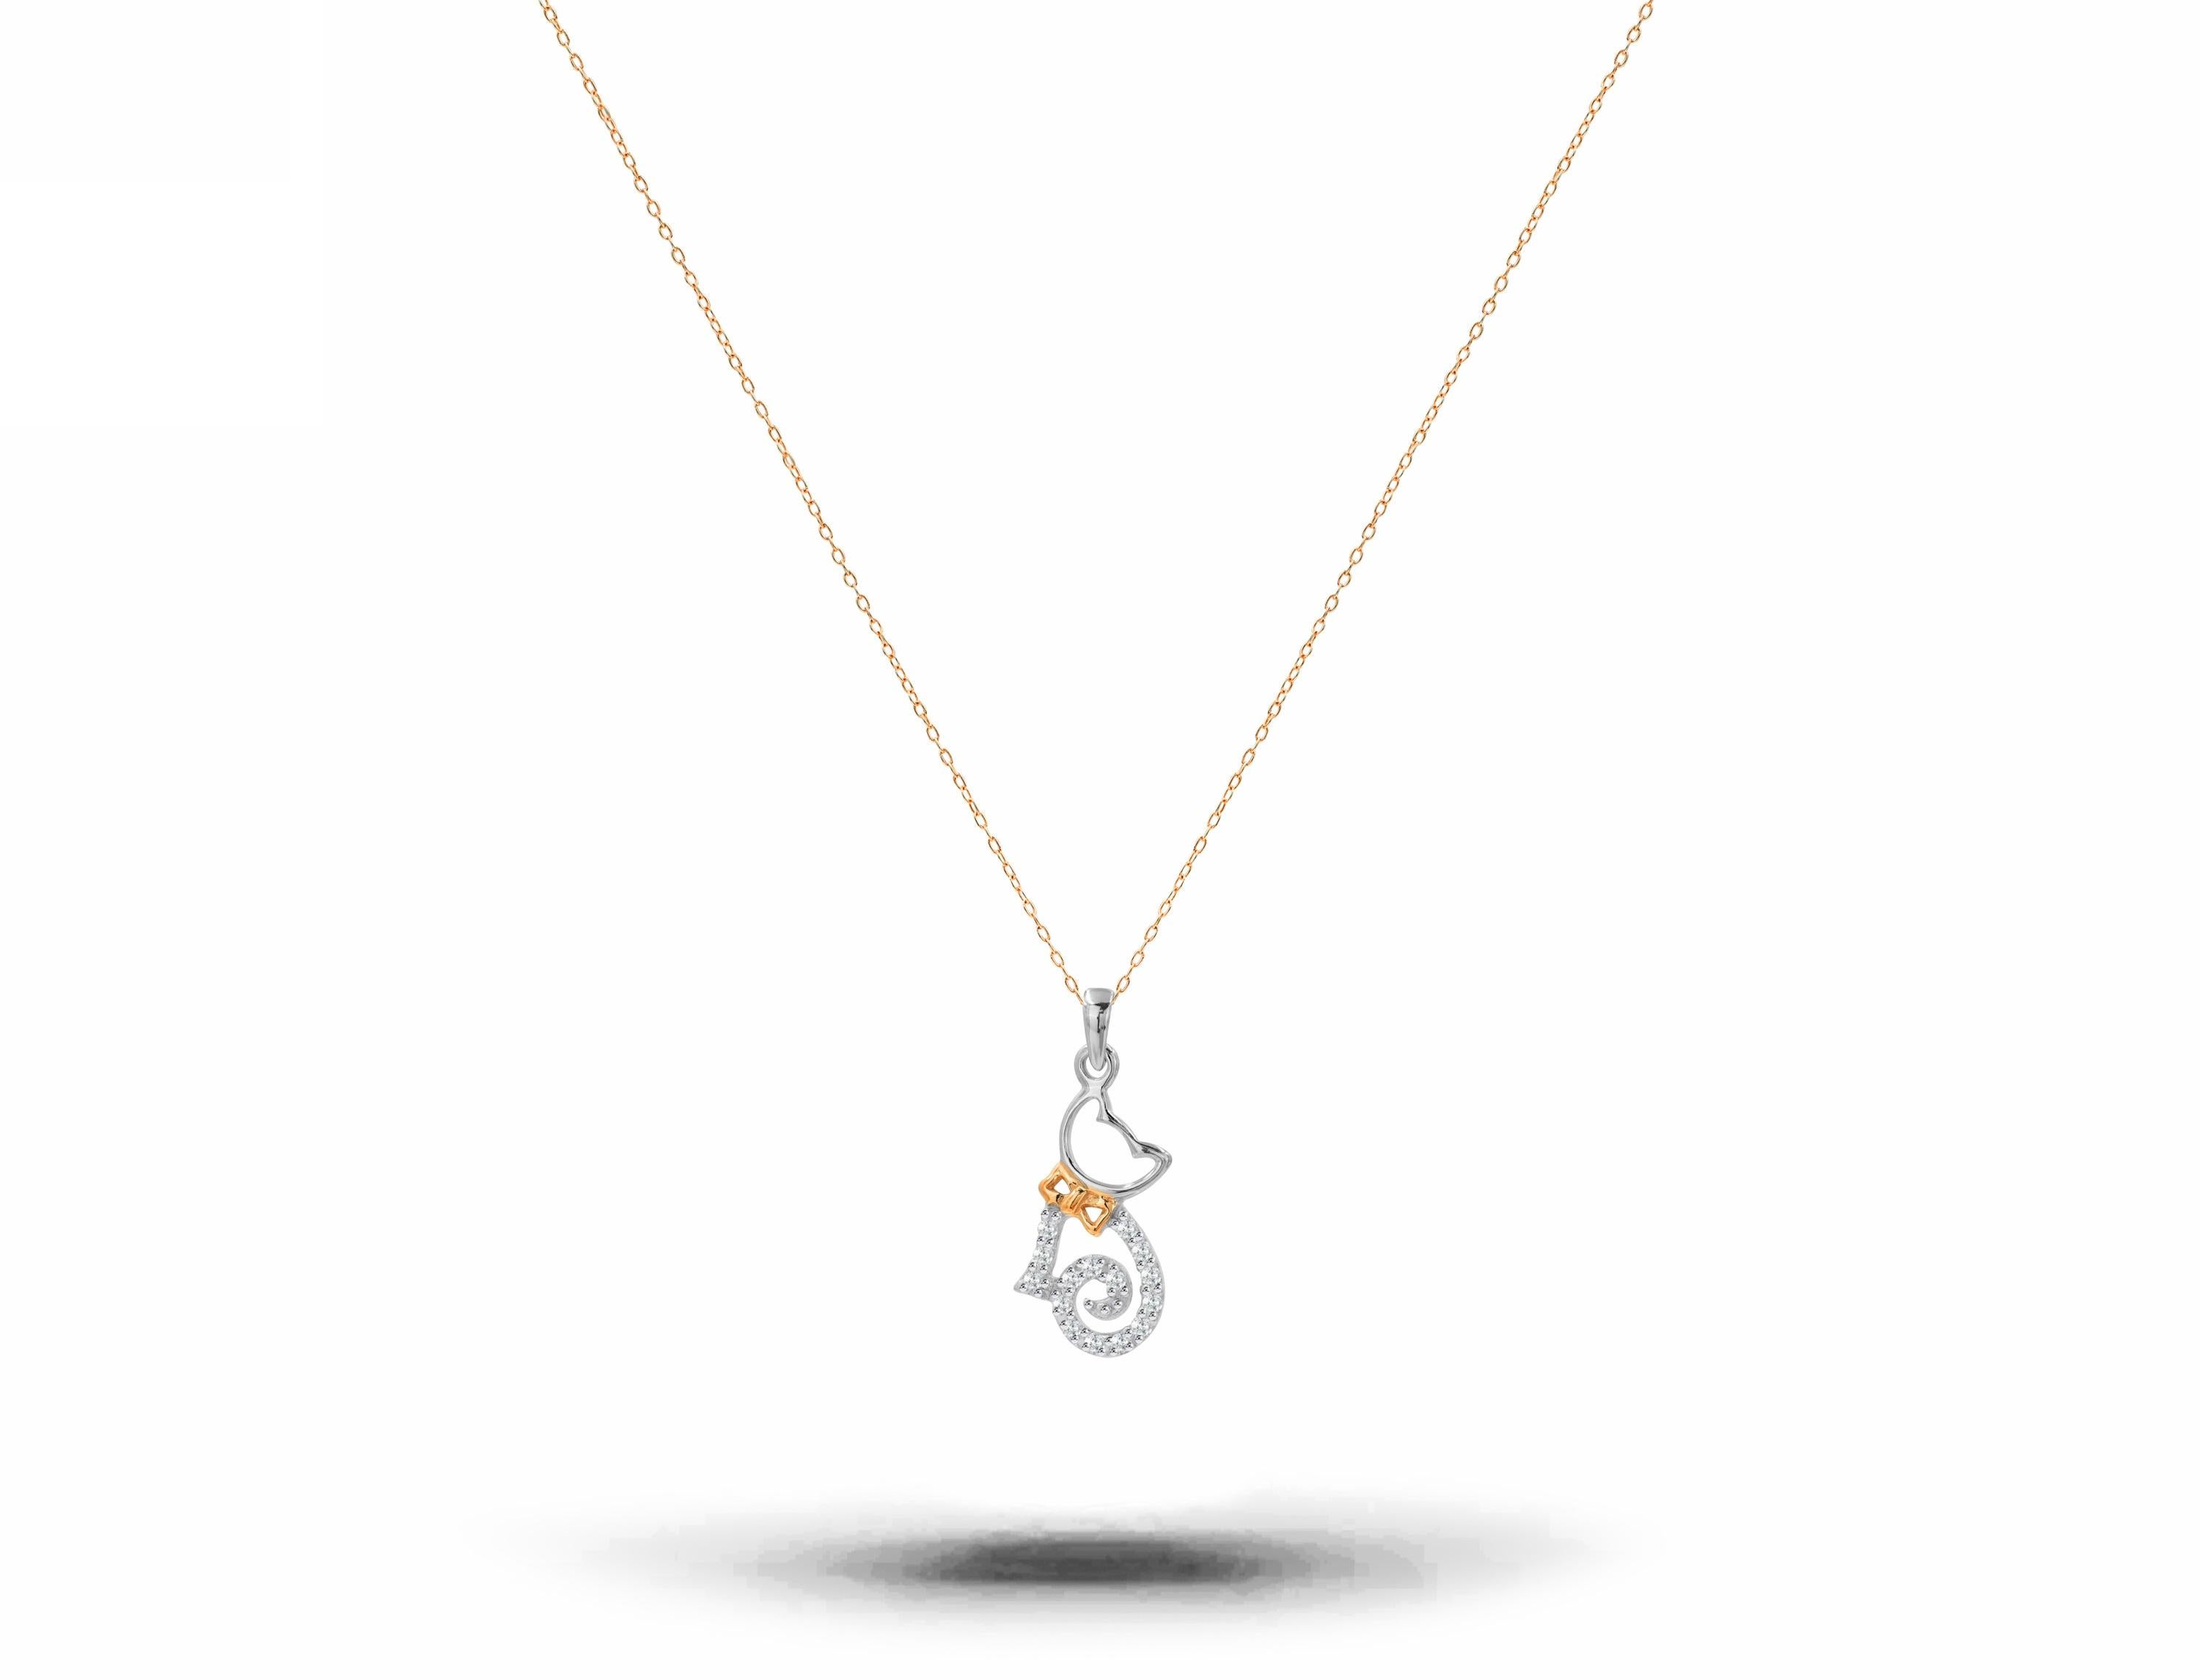 Diamond Cat Charm Necklace is made of 18k solid gold available in White and Rose Gold color.

Natural genuine round cut diamond each diamond is hand selected by me to ensure quality and set by a master setter in our studio. Diamond charm attached to